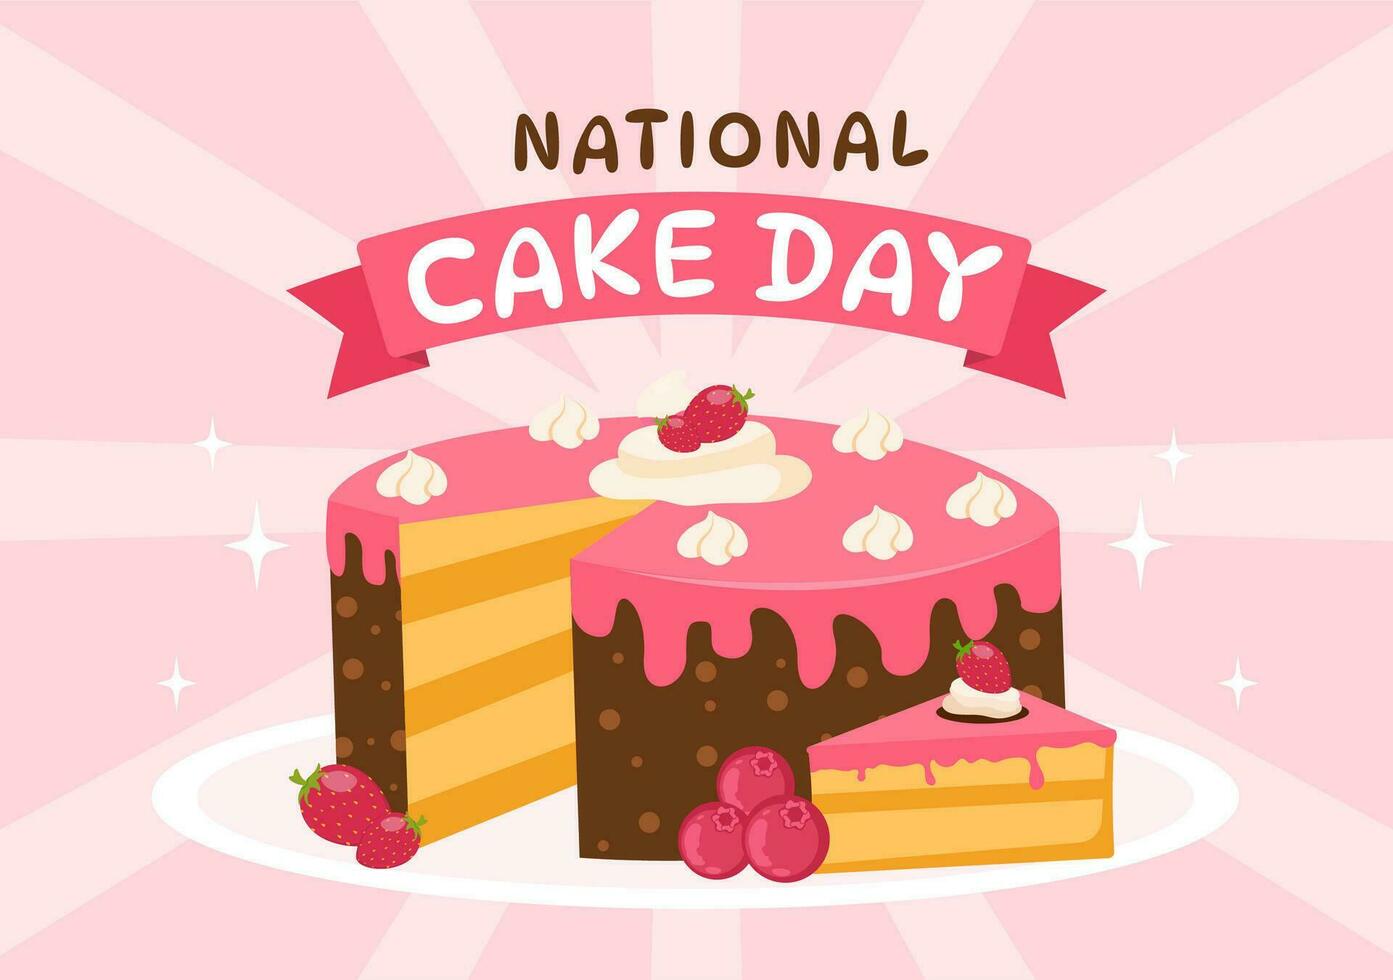 National Cake Day Vector Illustration on Holiday Celebrate November 26 with Sweet Bread in Flat Cartoon Pink Background Design Template